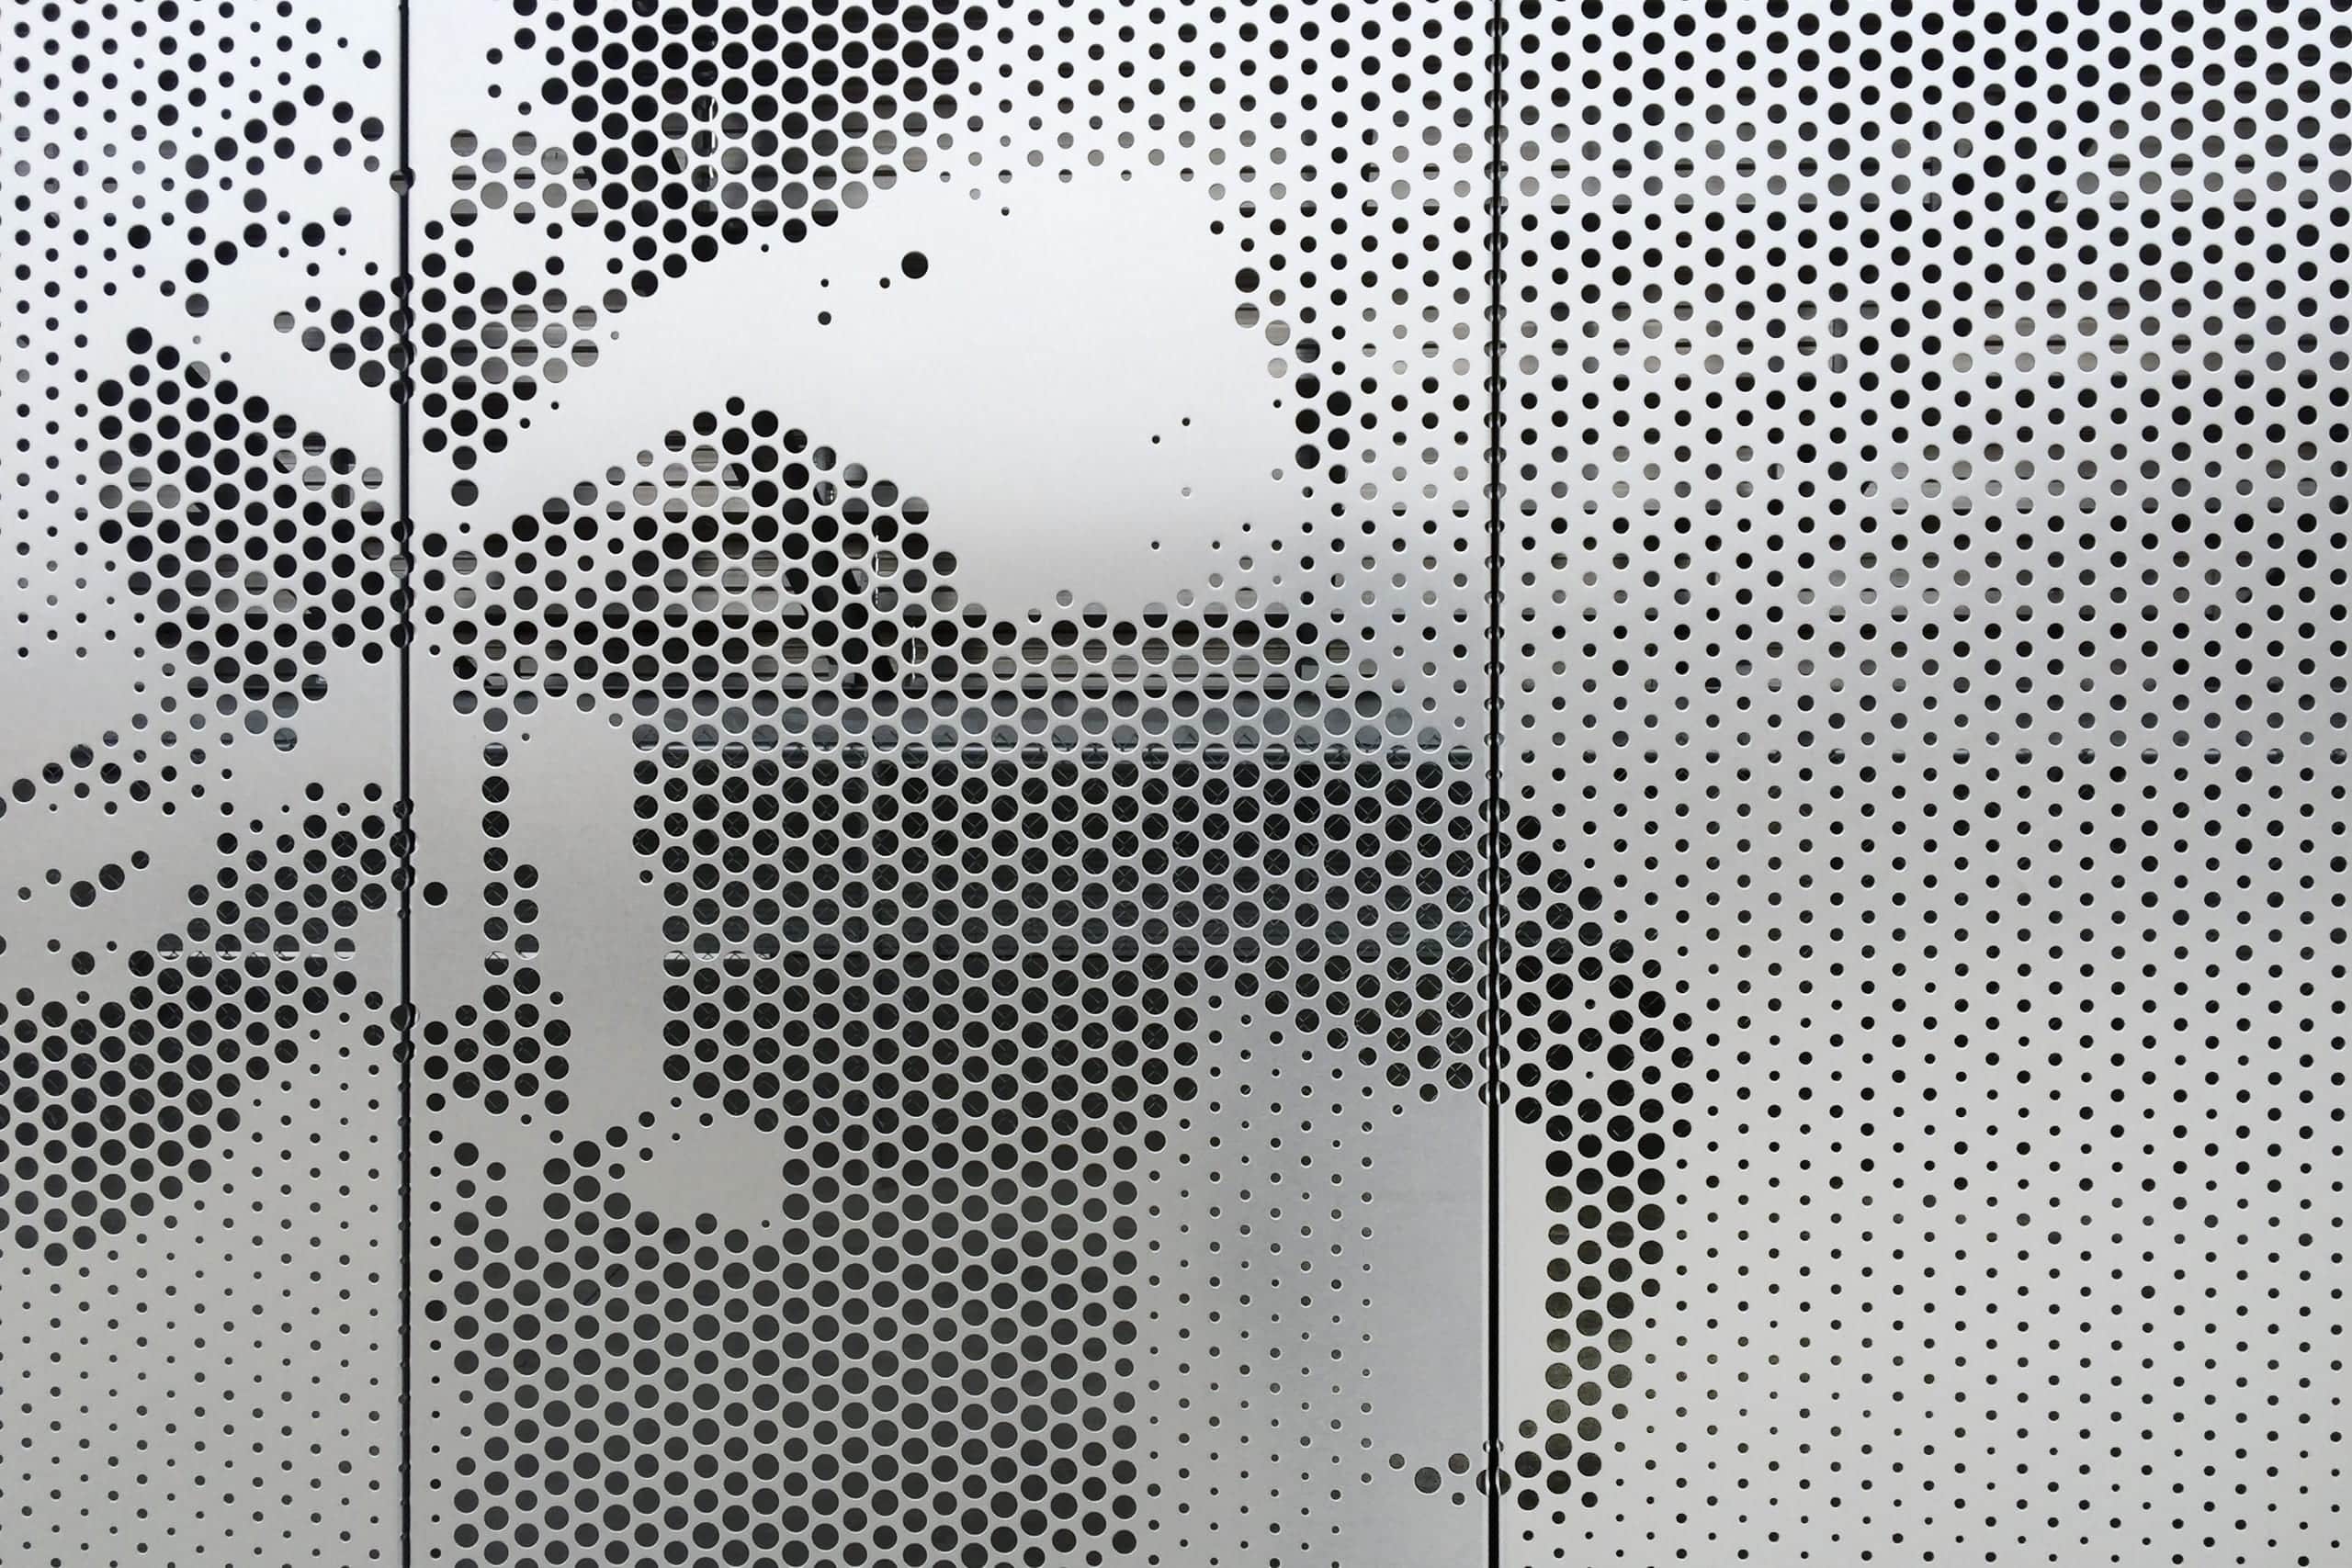 Detail of the Okie Blan<br /> chard Sports Complex perforated stainless steel.” /></picture>
<p class=